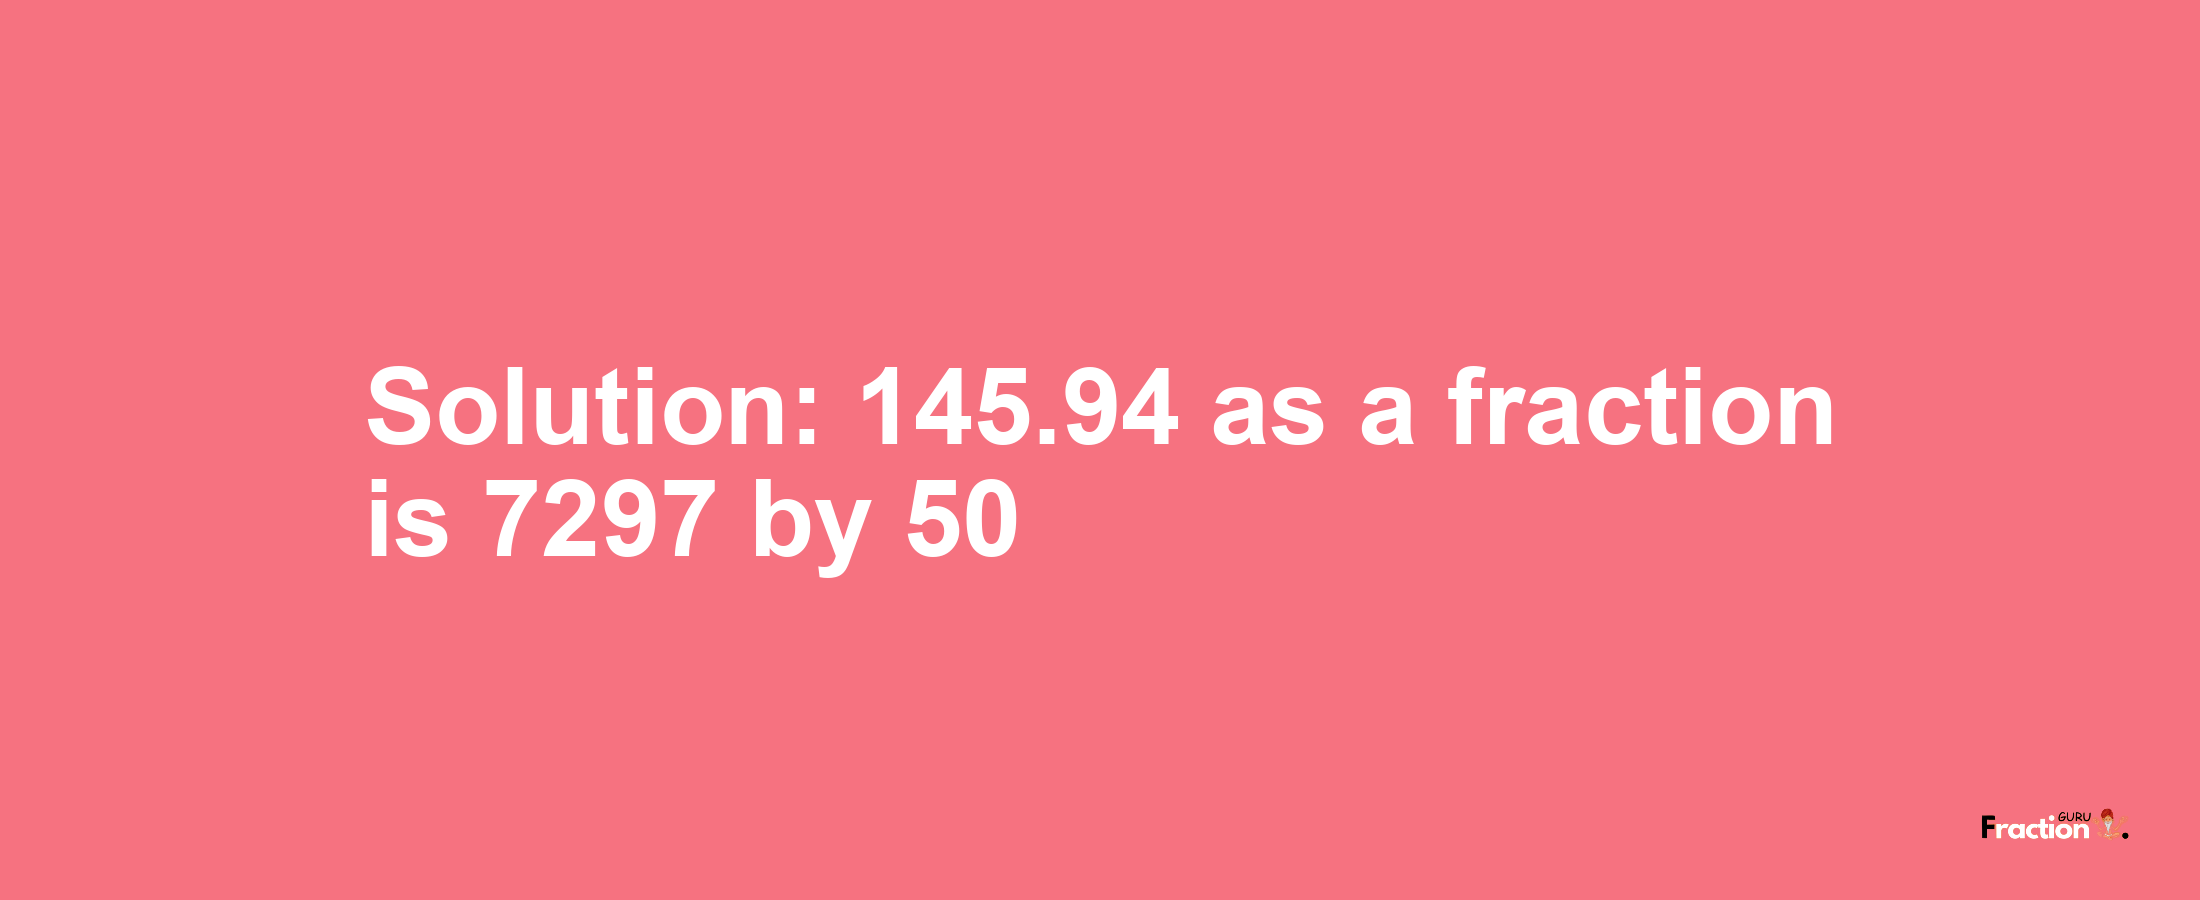 Solution:145.94 as a fraction is 7297/50